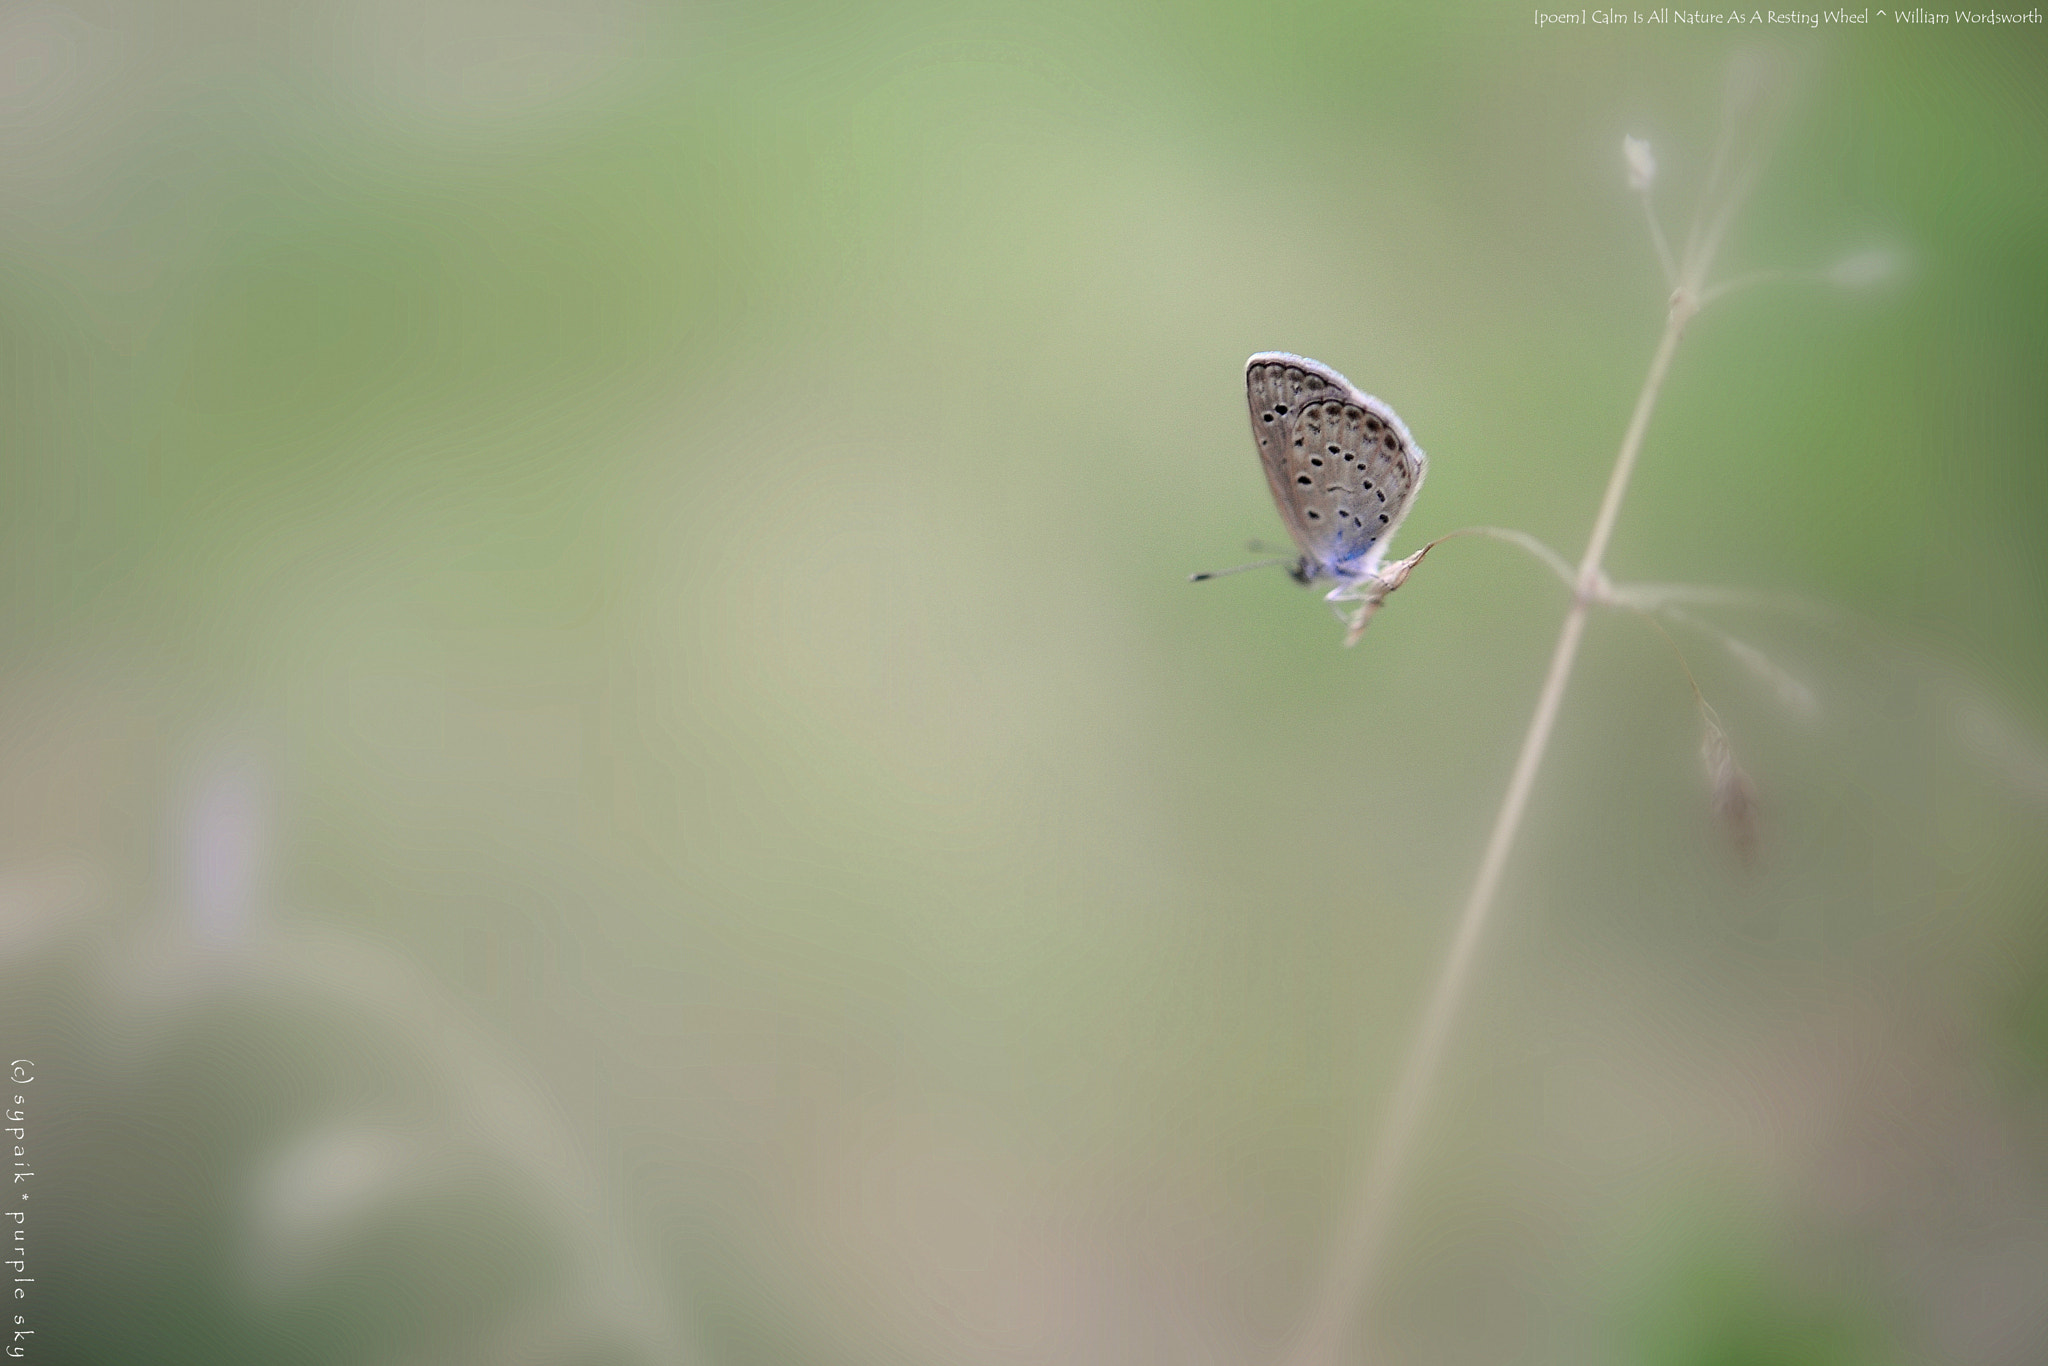 Nikon D700 + Nikon AF-S Micro-Nikkor 60mm F2.8G ED sample photo. Calm is all nature as a resting wheel ii photography